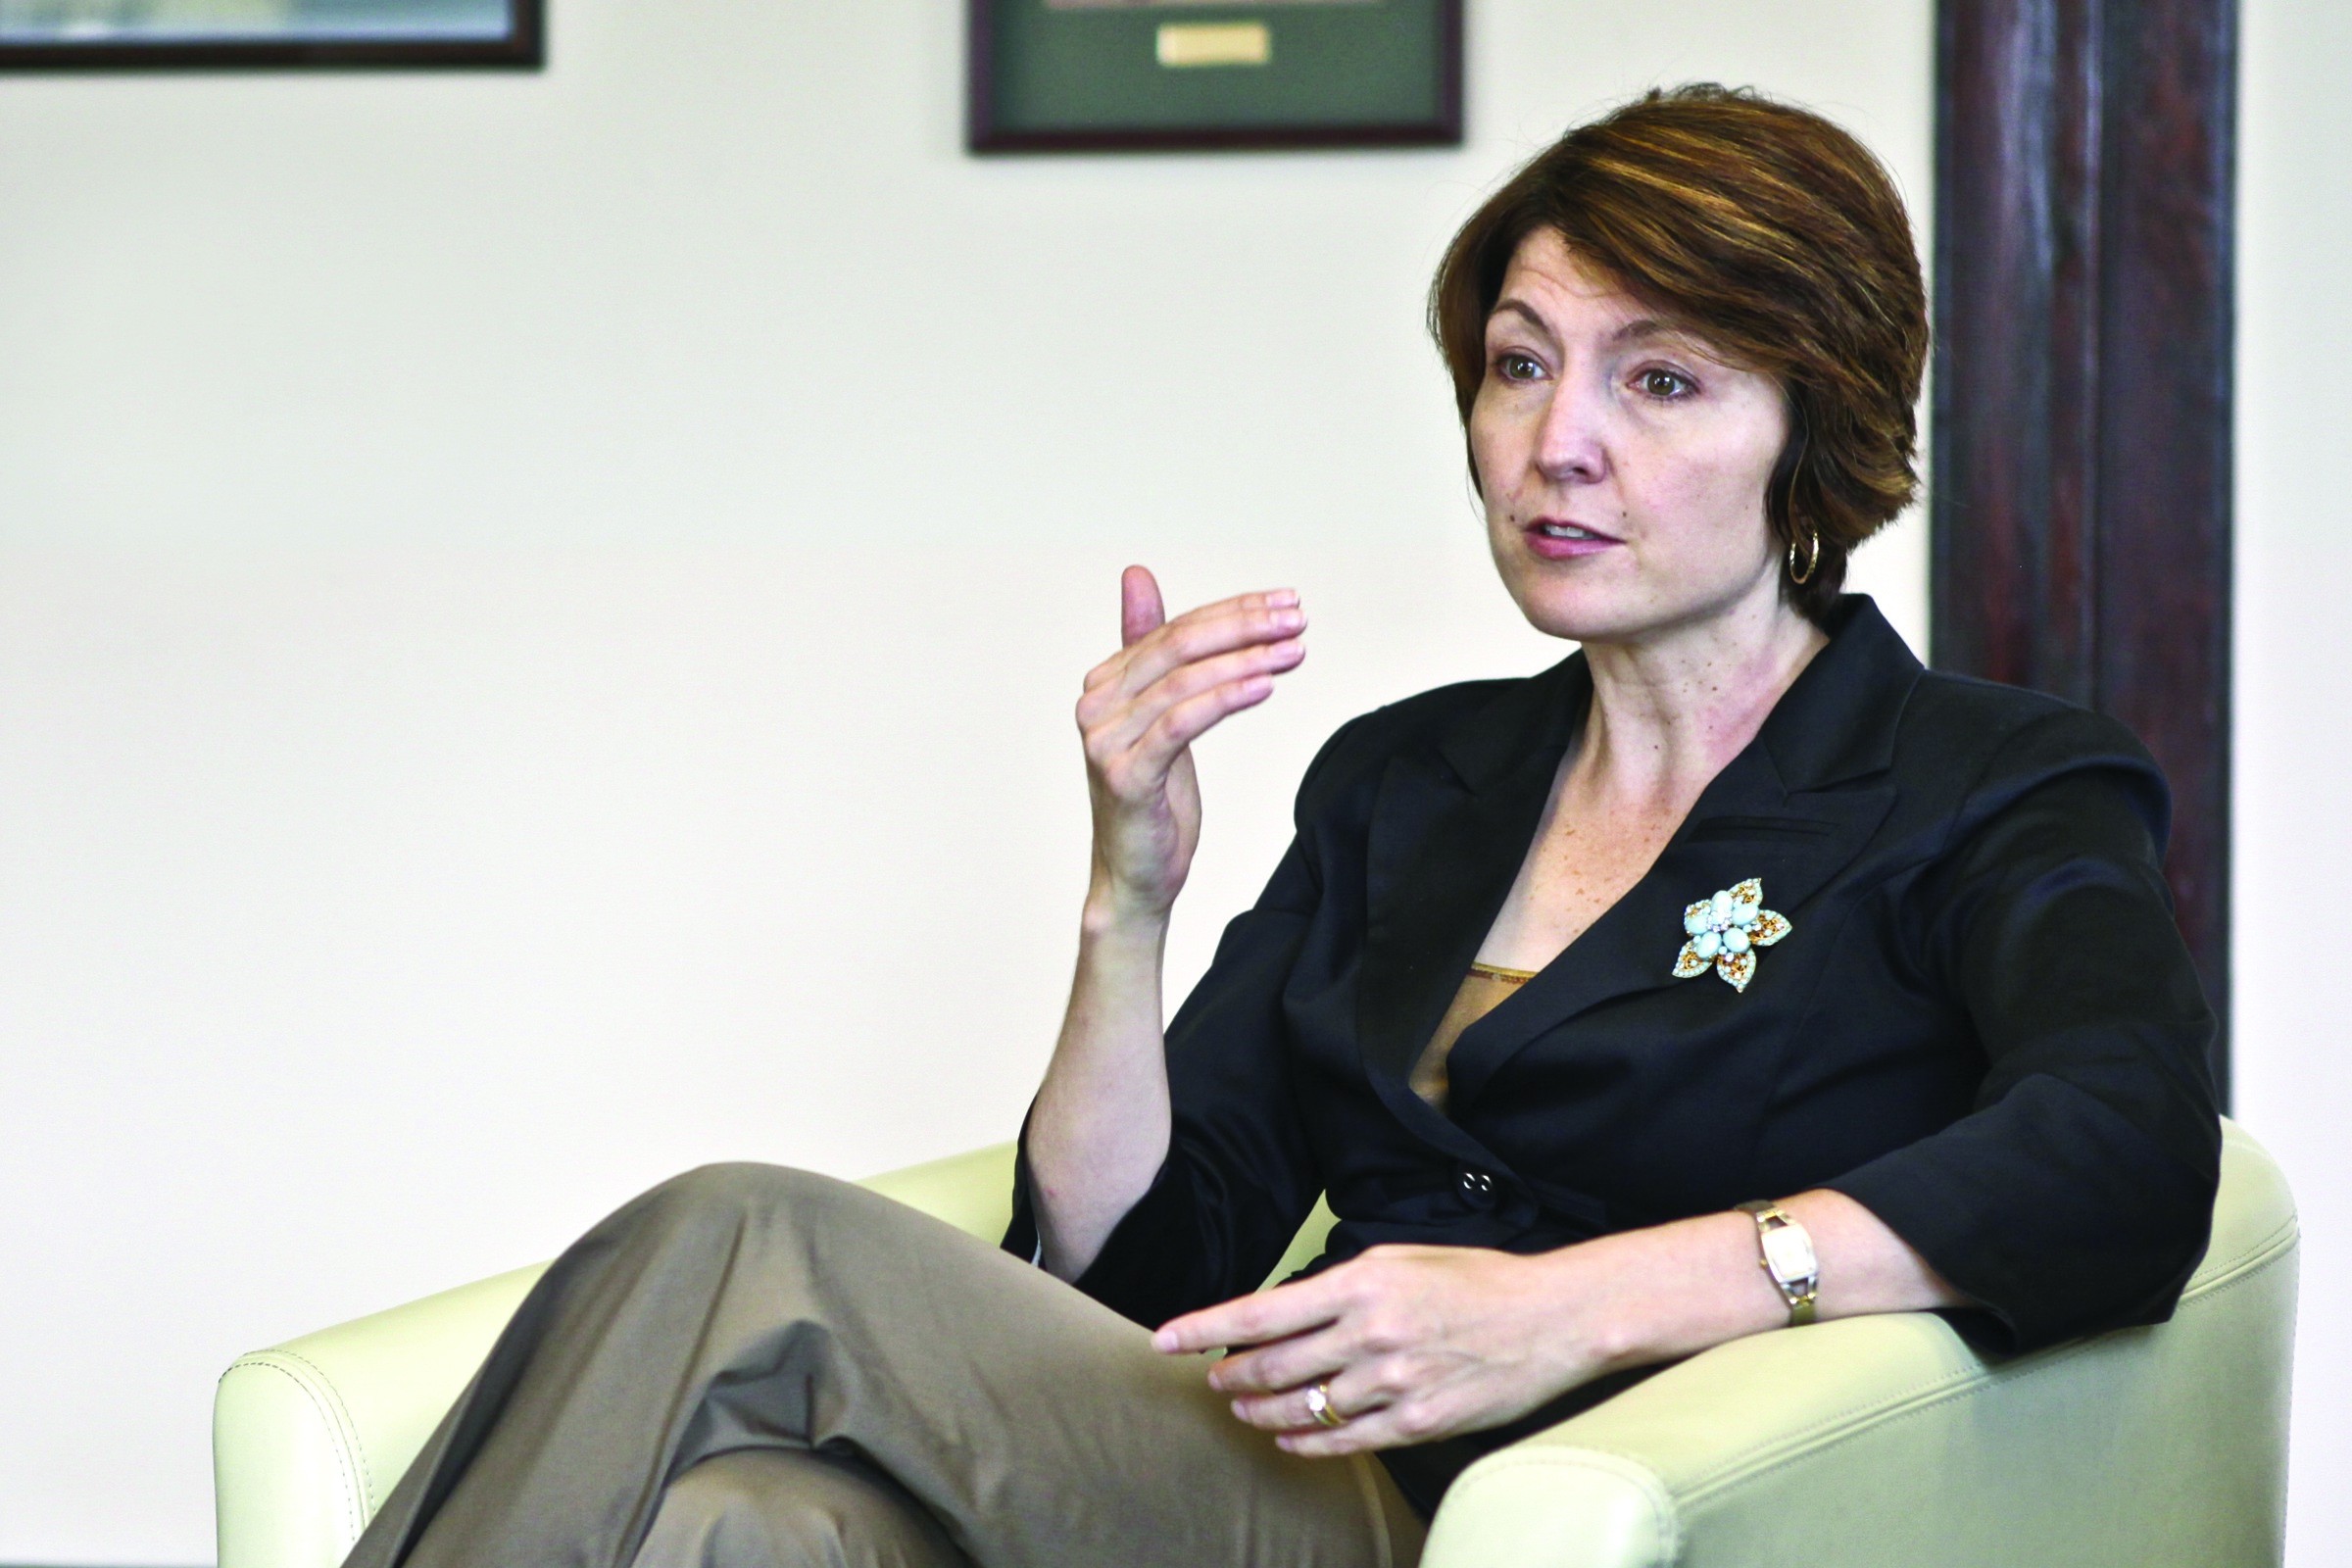 Republicans, progressives gear up for McMorris Rodgers town hall